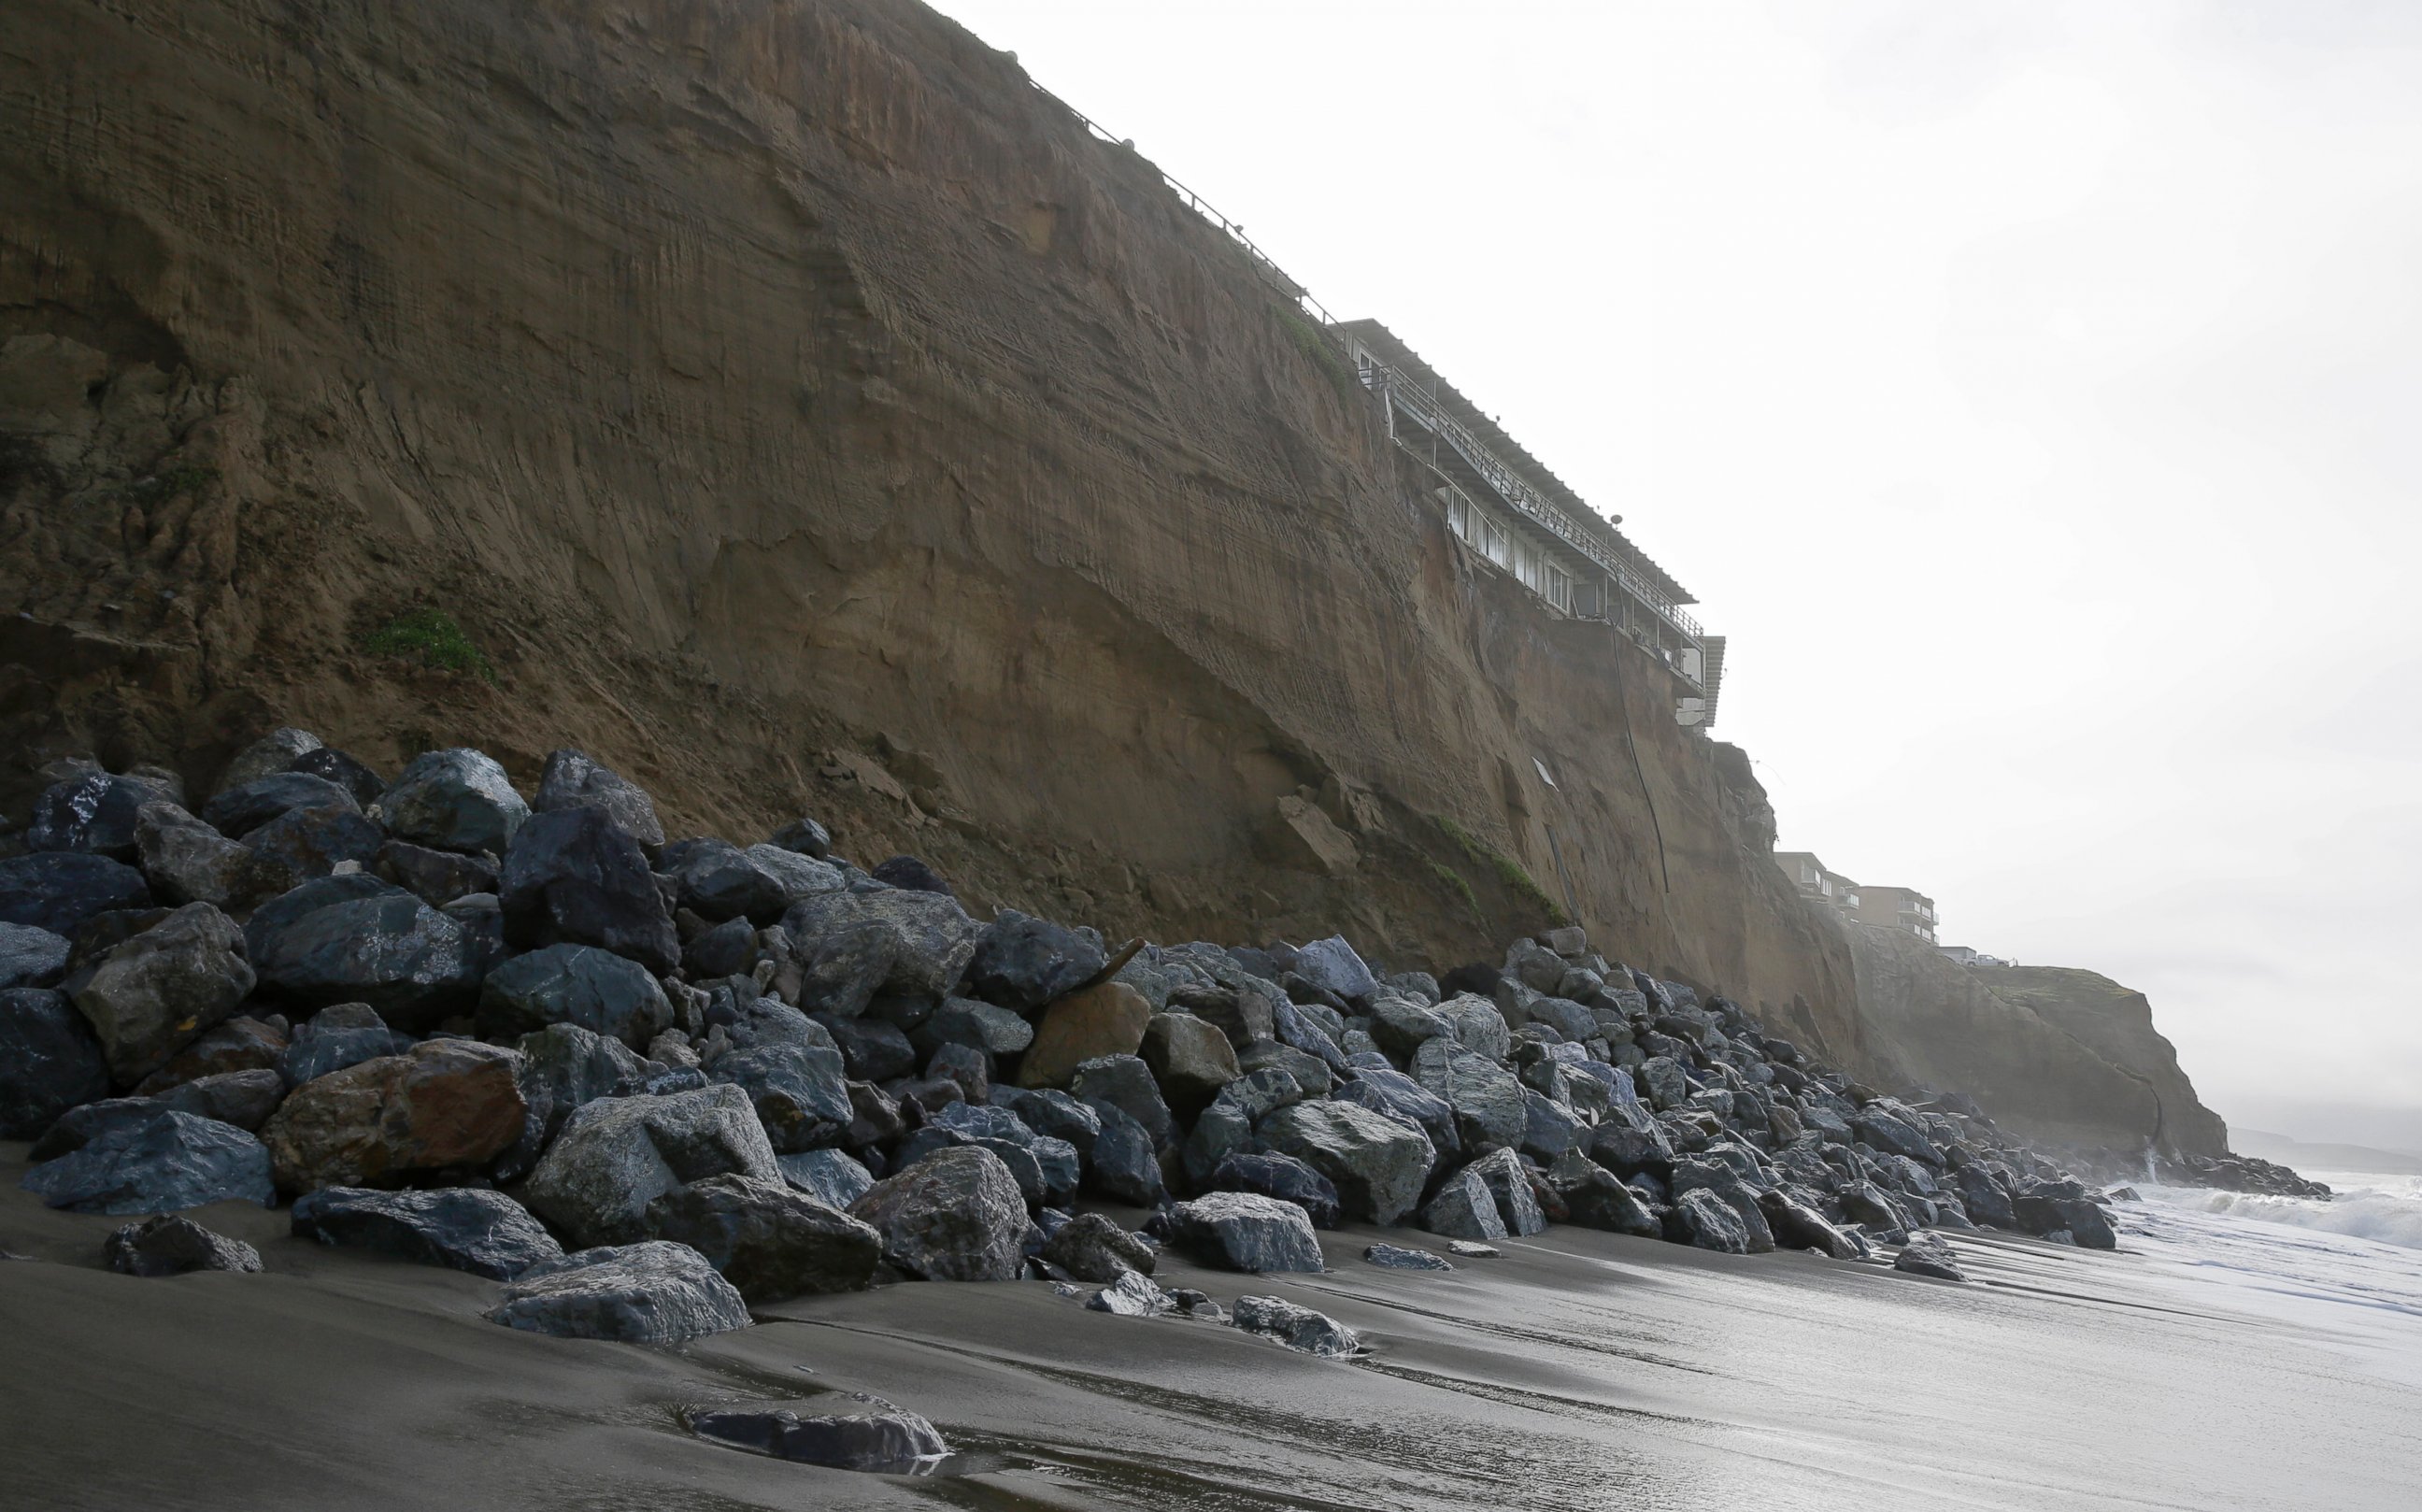 PHOTO: Boulders shore up an eroding cliff below an apartment complex, Jan. 25, 2016, in Pacifica, Calif. Strong waves caused by El Nino storms ate away part of a sea wall and cliffs threatening several homes and an apartment building.